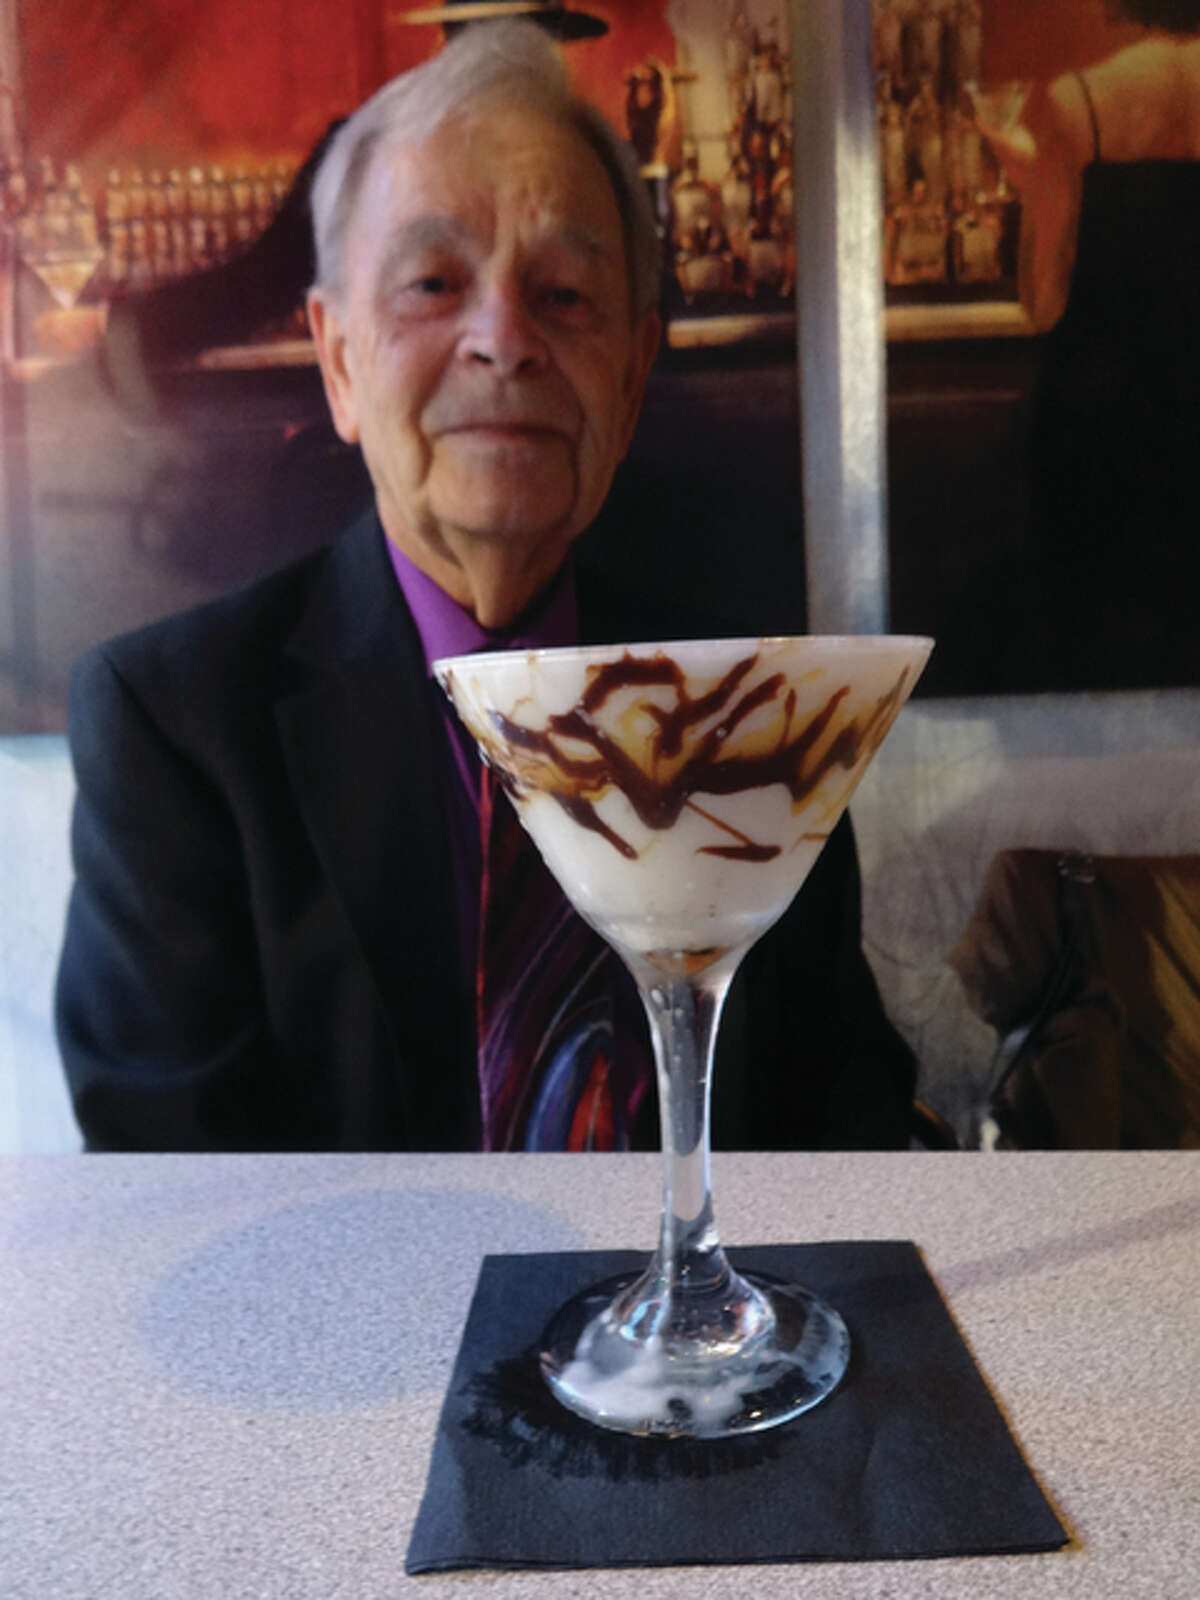 Bob Hunter, of Bethalto, anticipating drinking his once-a-week martini and No. 22, “A Streetcar Name Desire,” on Chez Marilyn restaurant and cocktail lounge’s list of 30 martinis.